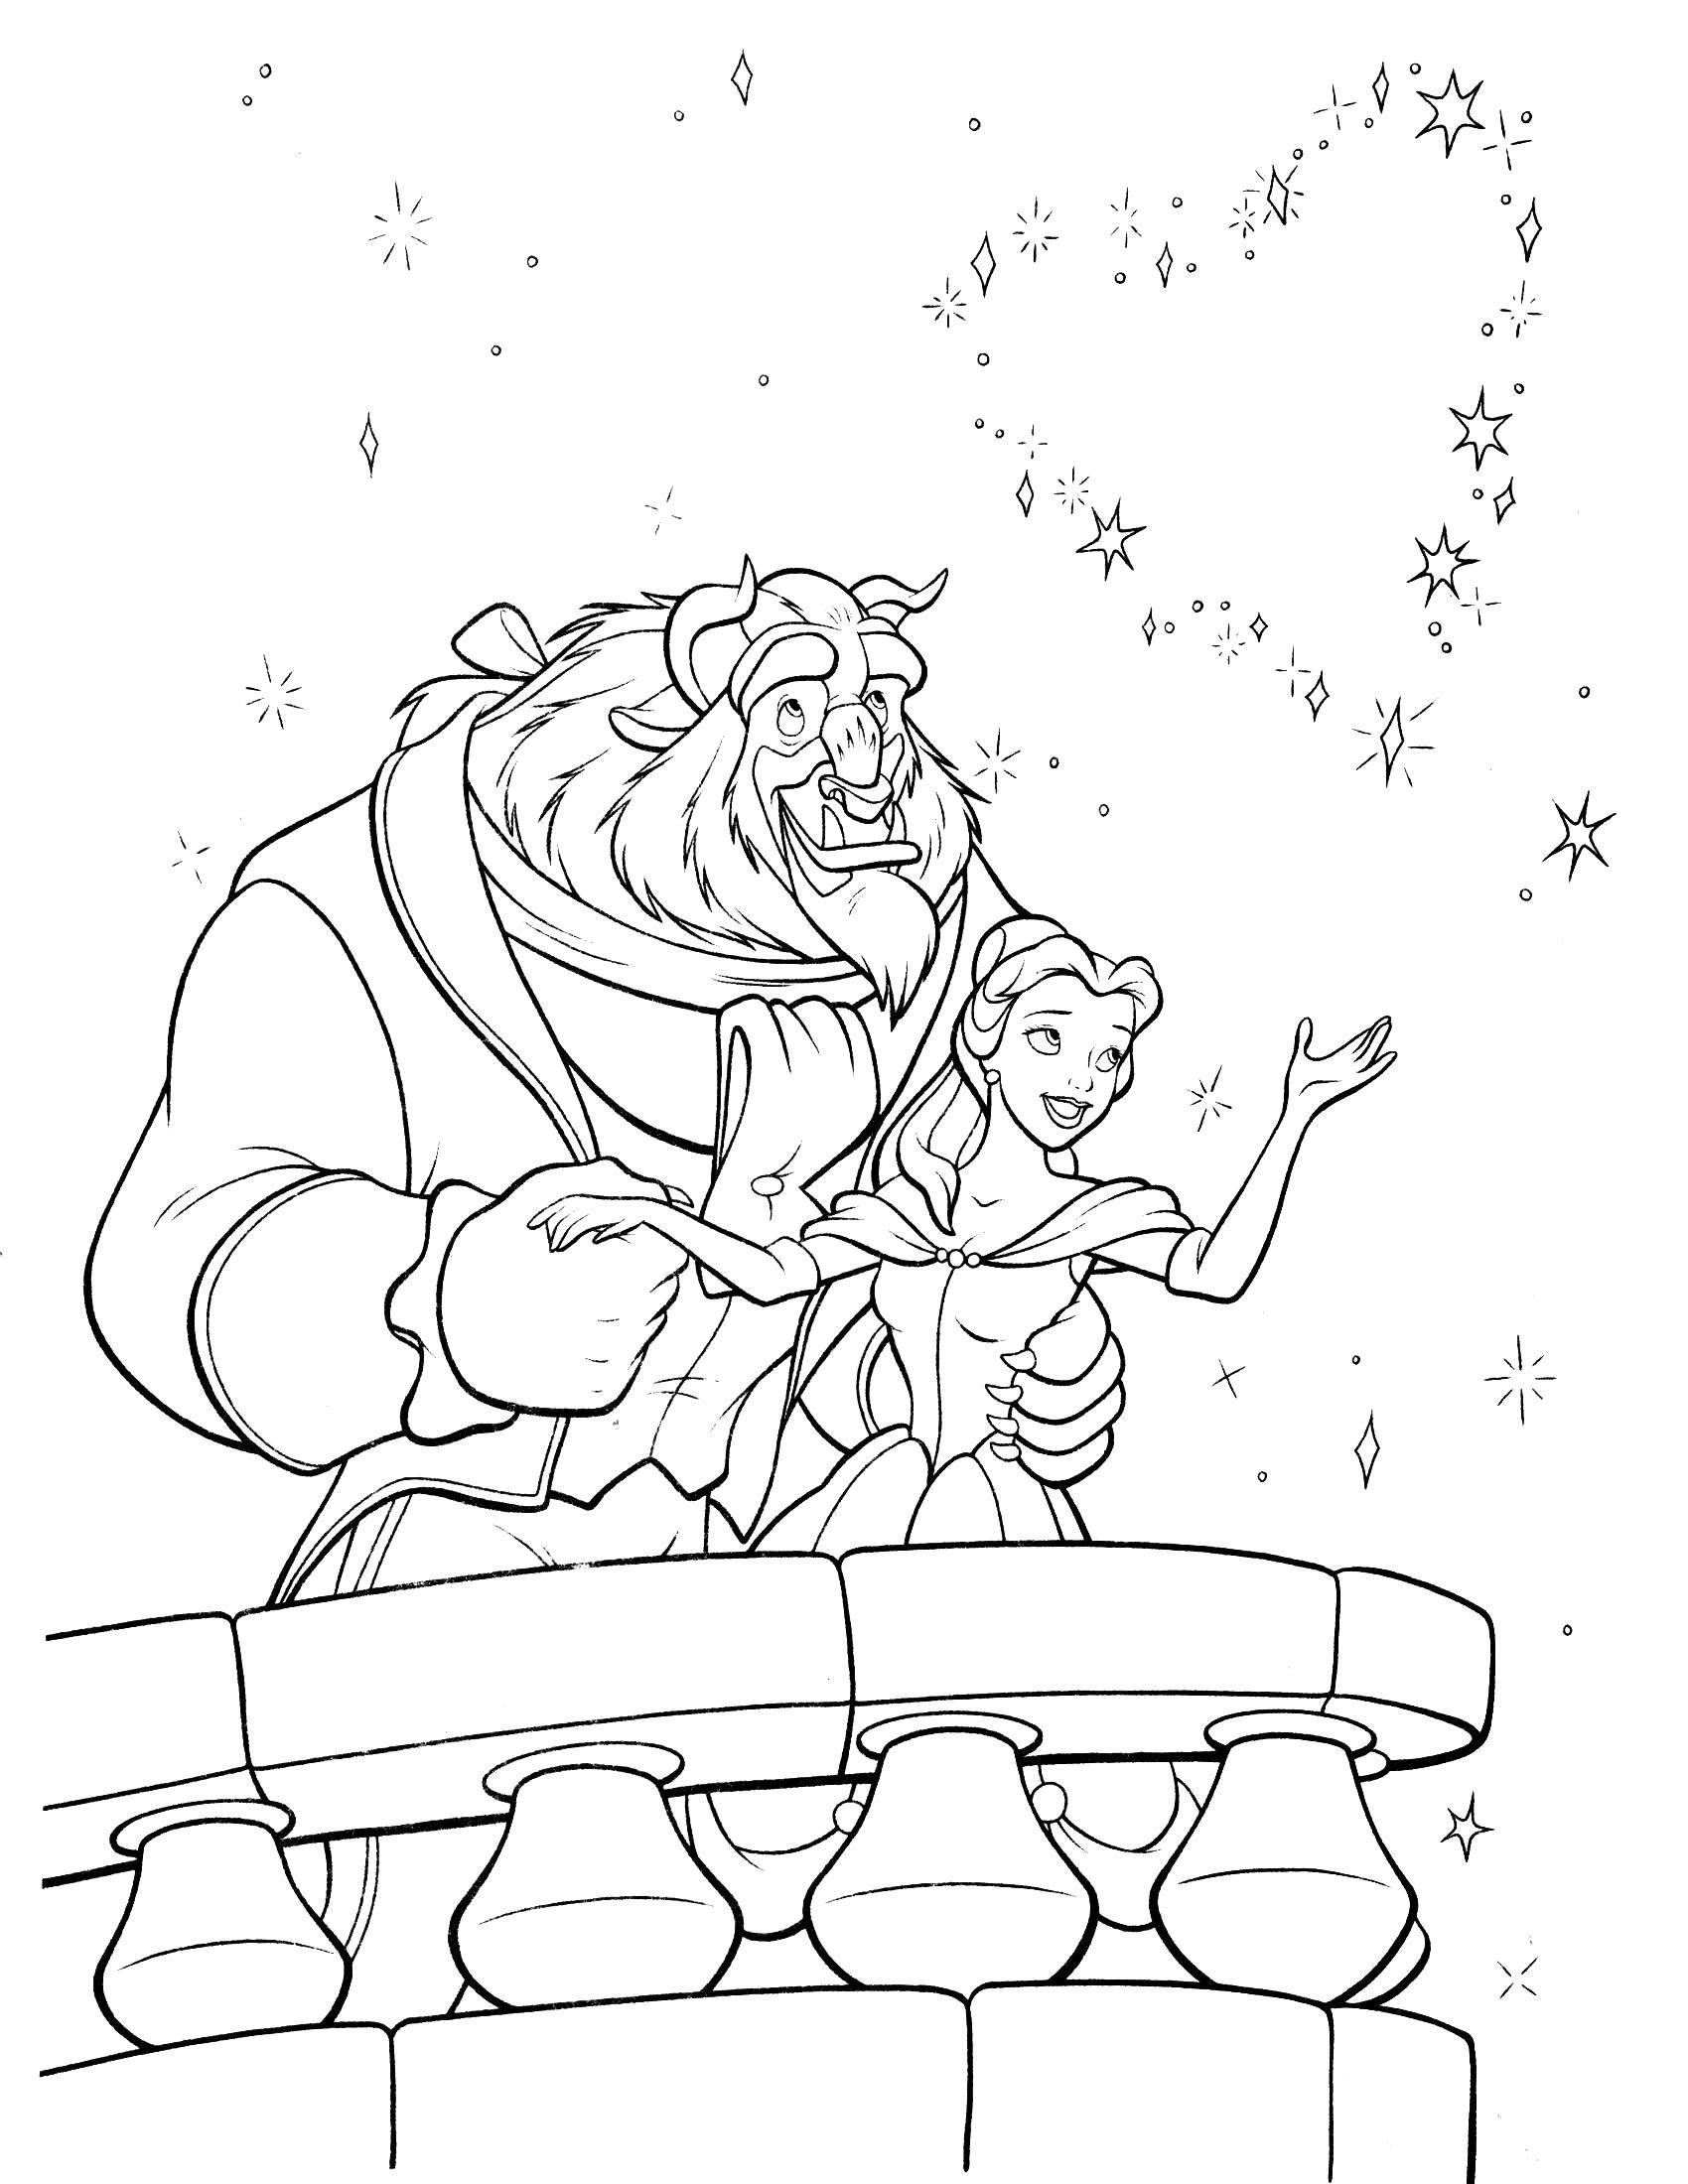 Coloring Love beauty and the beast. Category beauty and the beast. Tags:  Disney, "beauty and the beast".